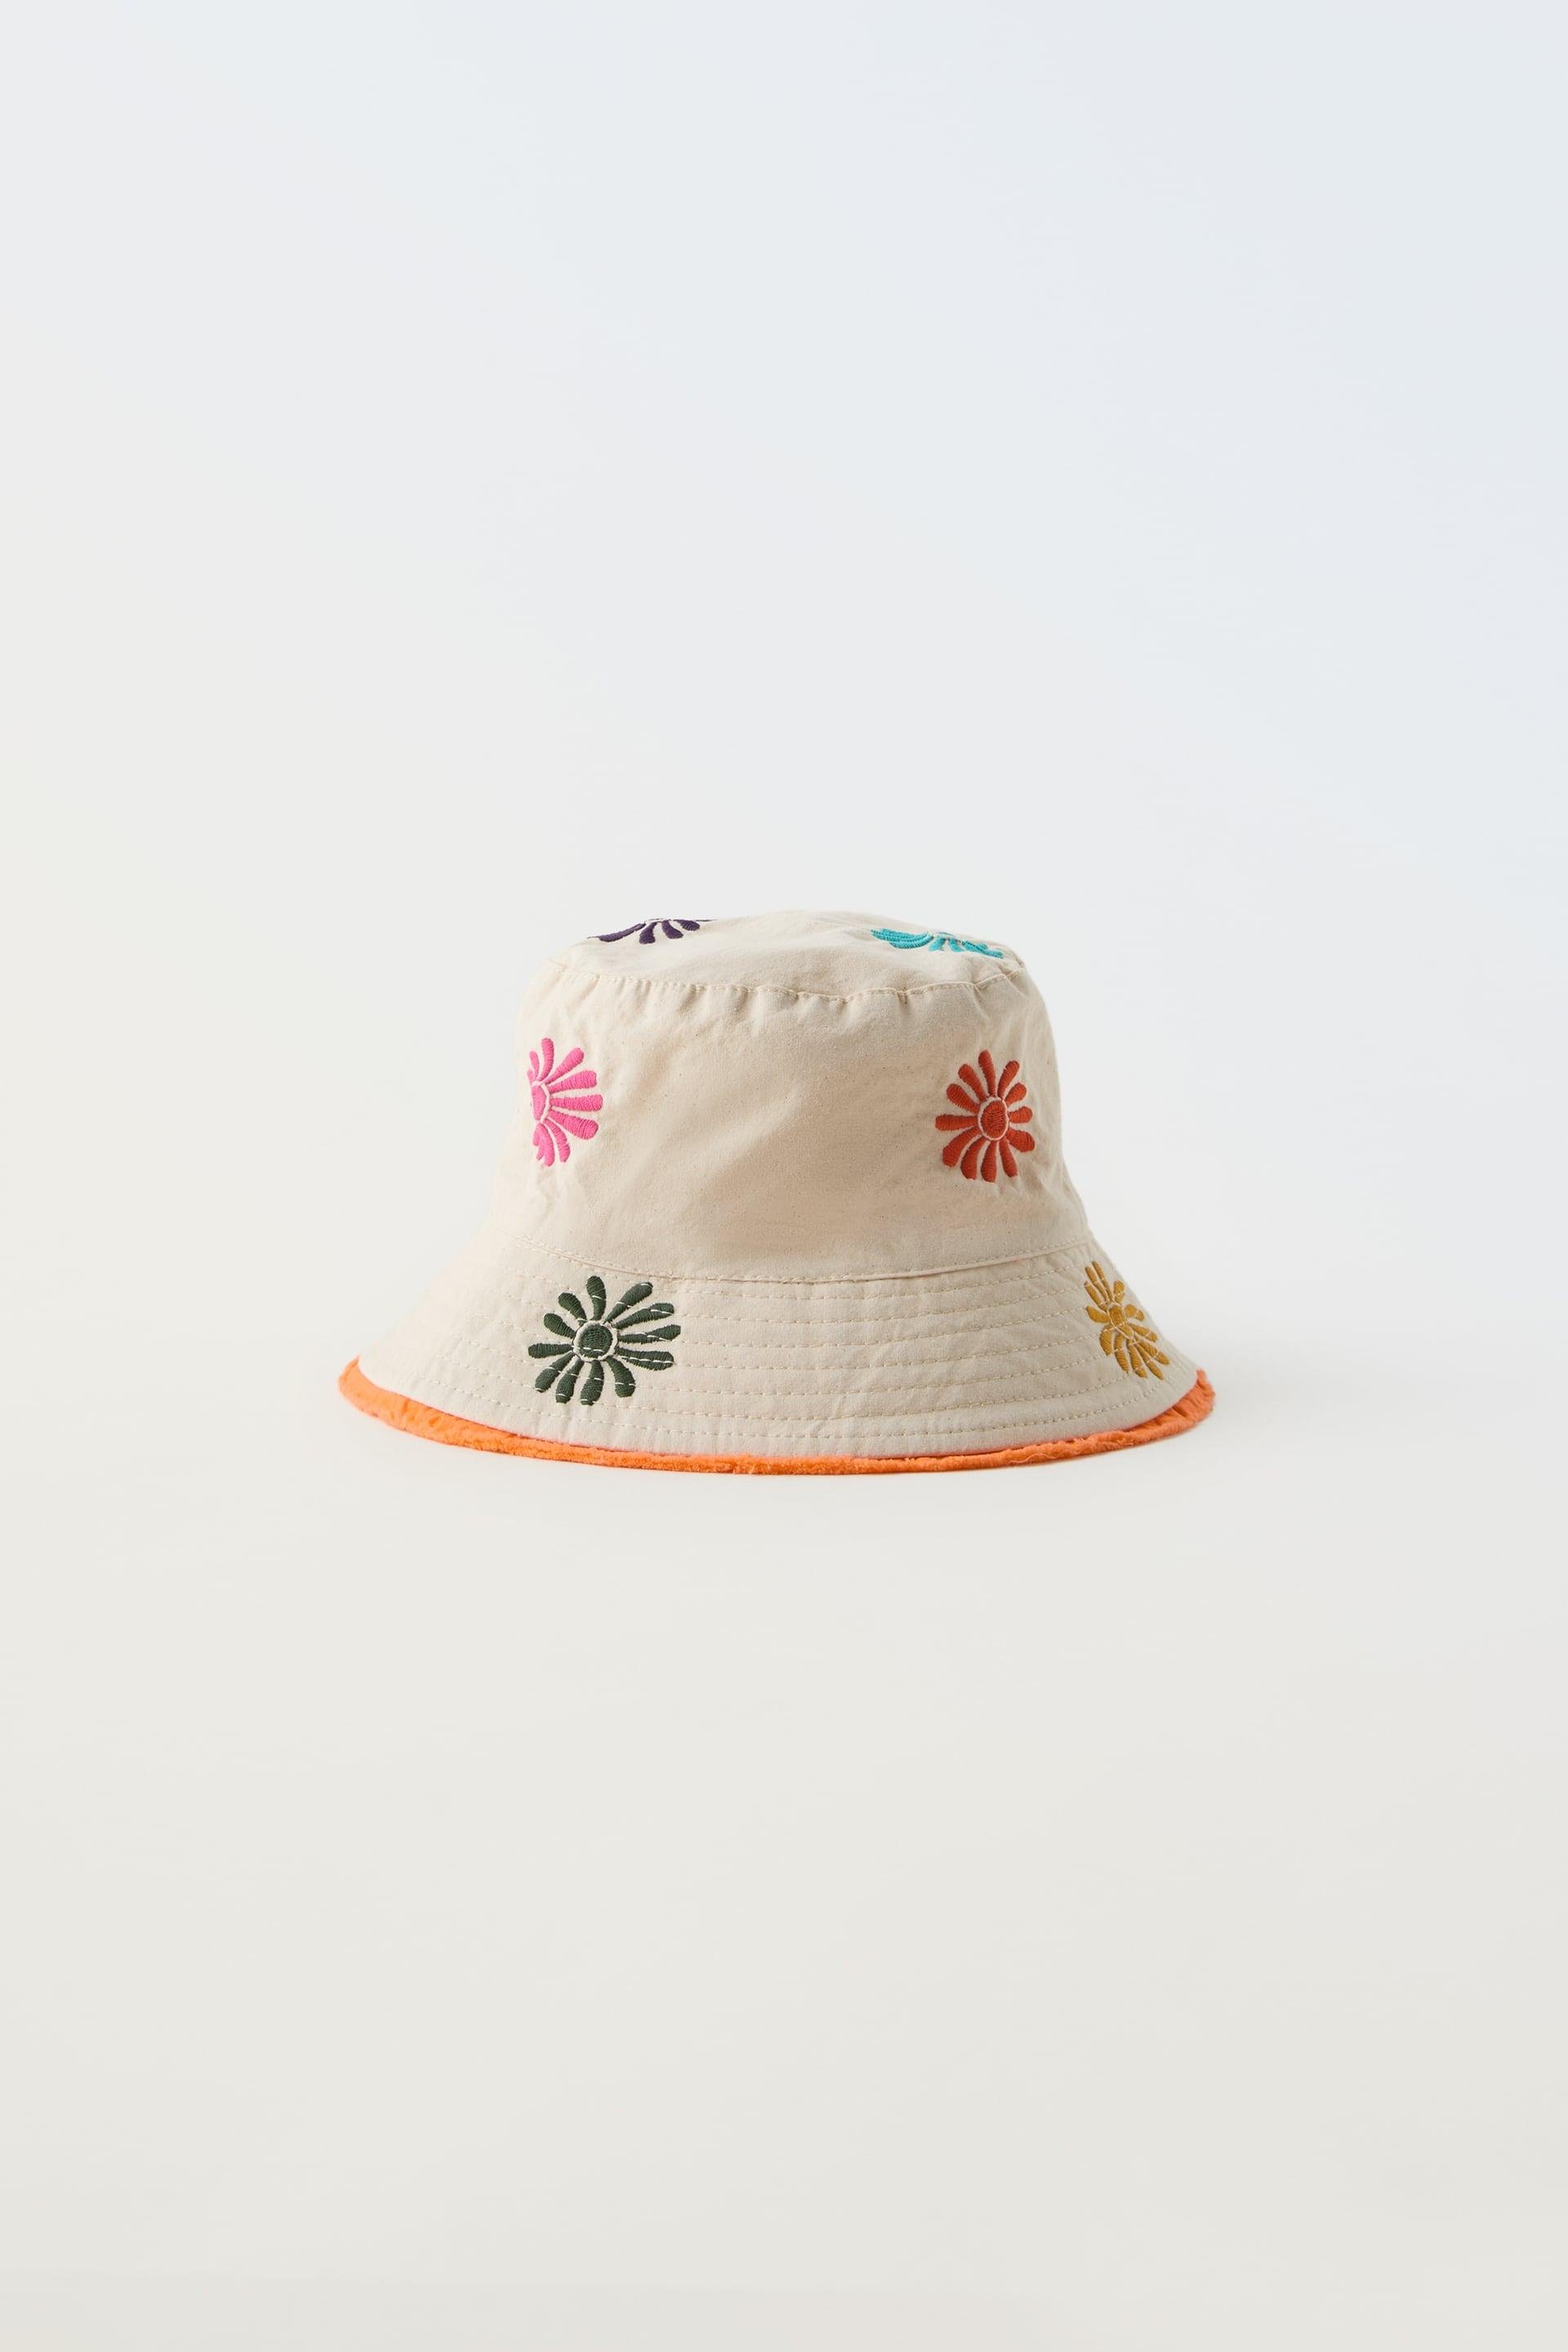 EMBROIDERED FLORAL BUCKET HAT by ZARA